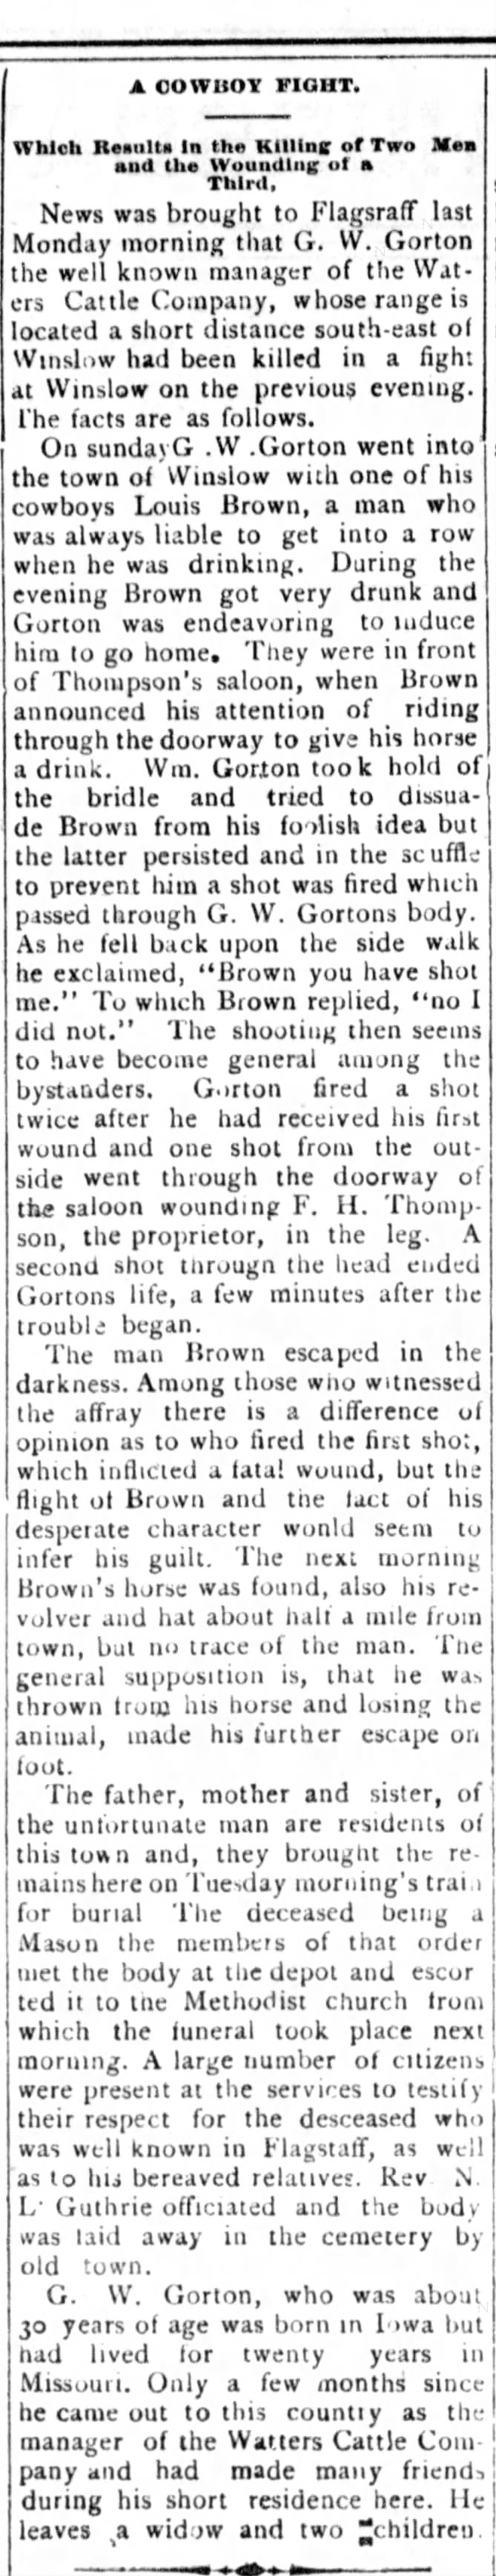 A cowboy fight in Winslow. 2 men dead. F H Thompson shot & wounded.